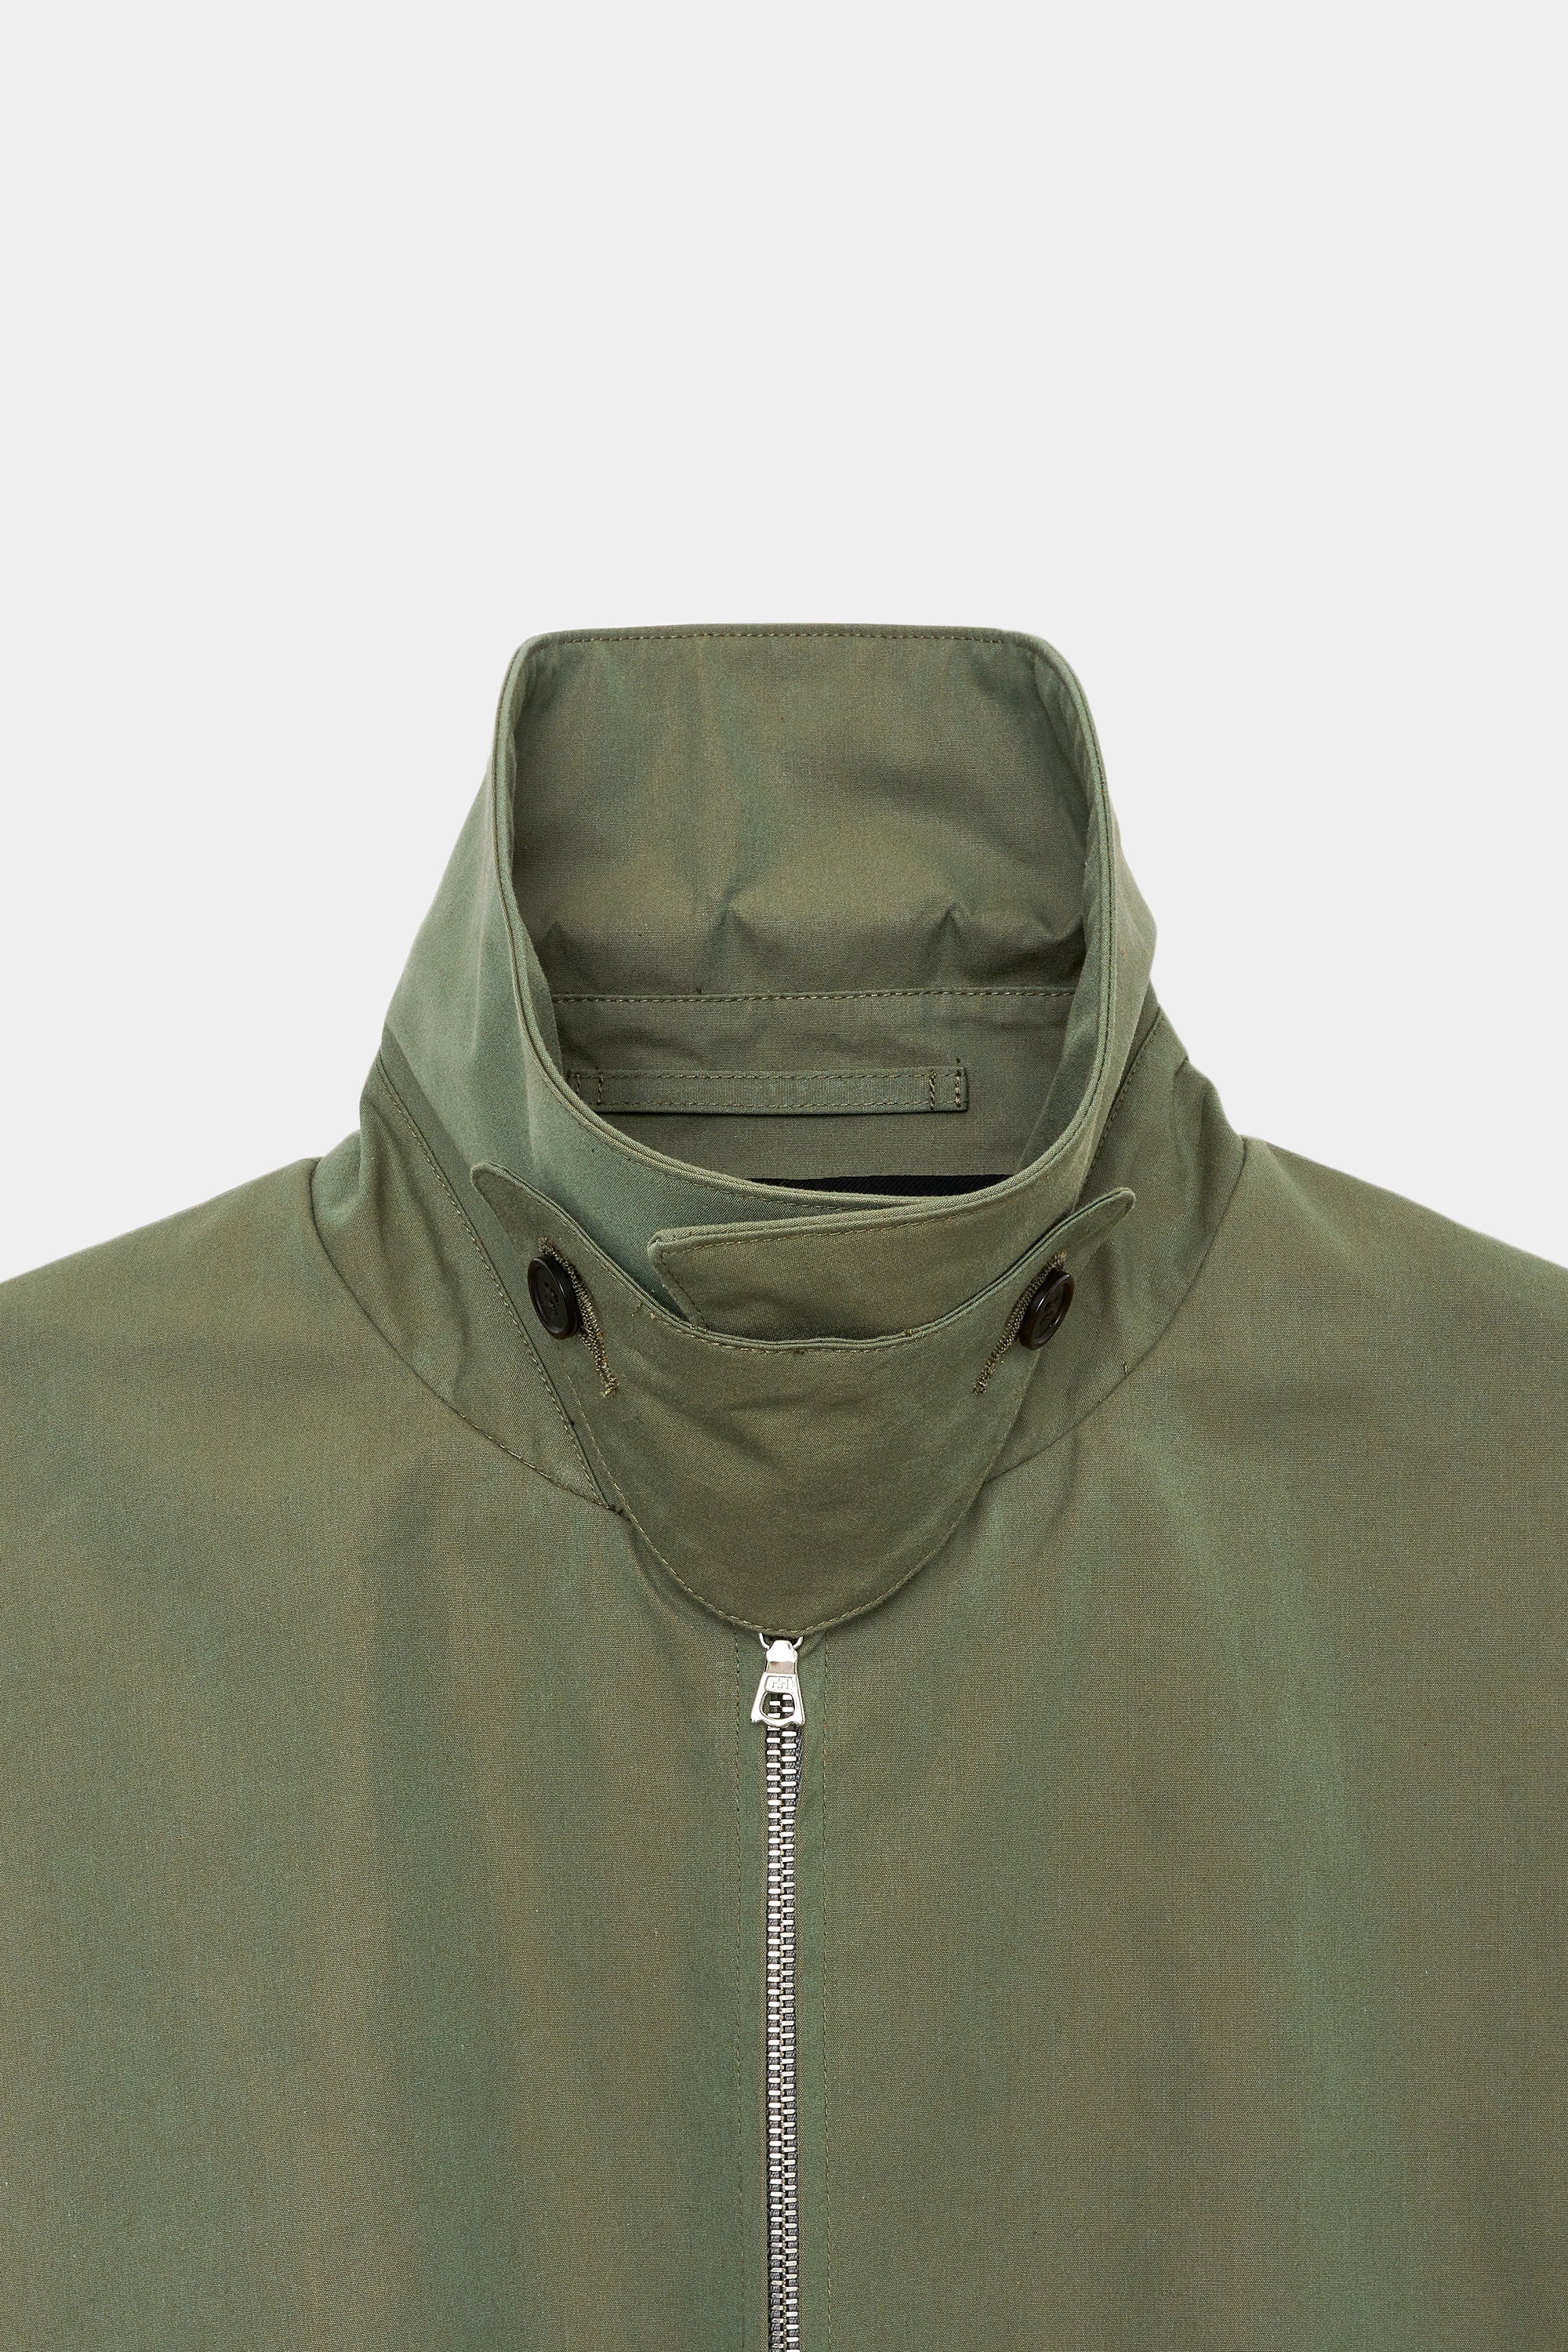 ORGANIC COTTON LIGHT ALL WEATHER CLOTH WIDE SPORTS JACKET, Moss Green